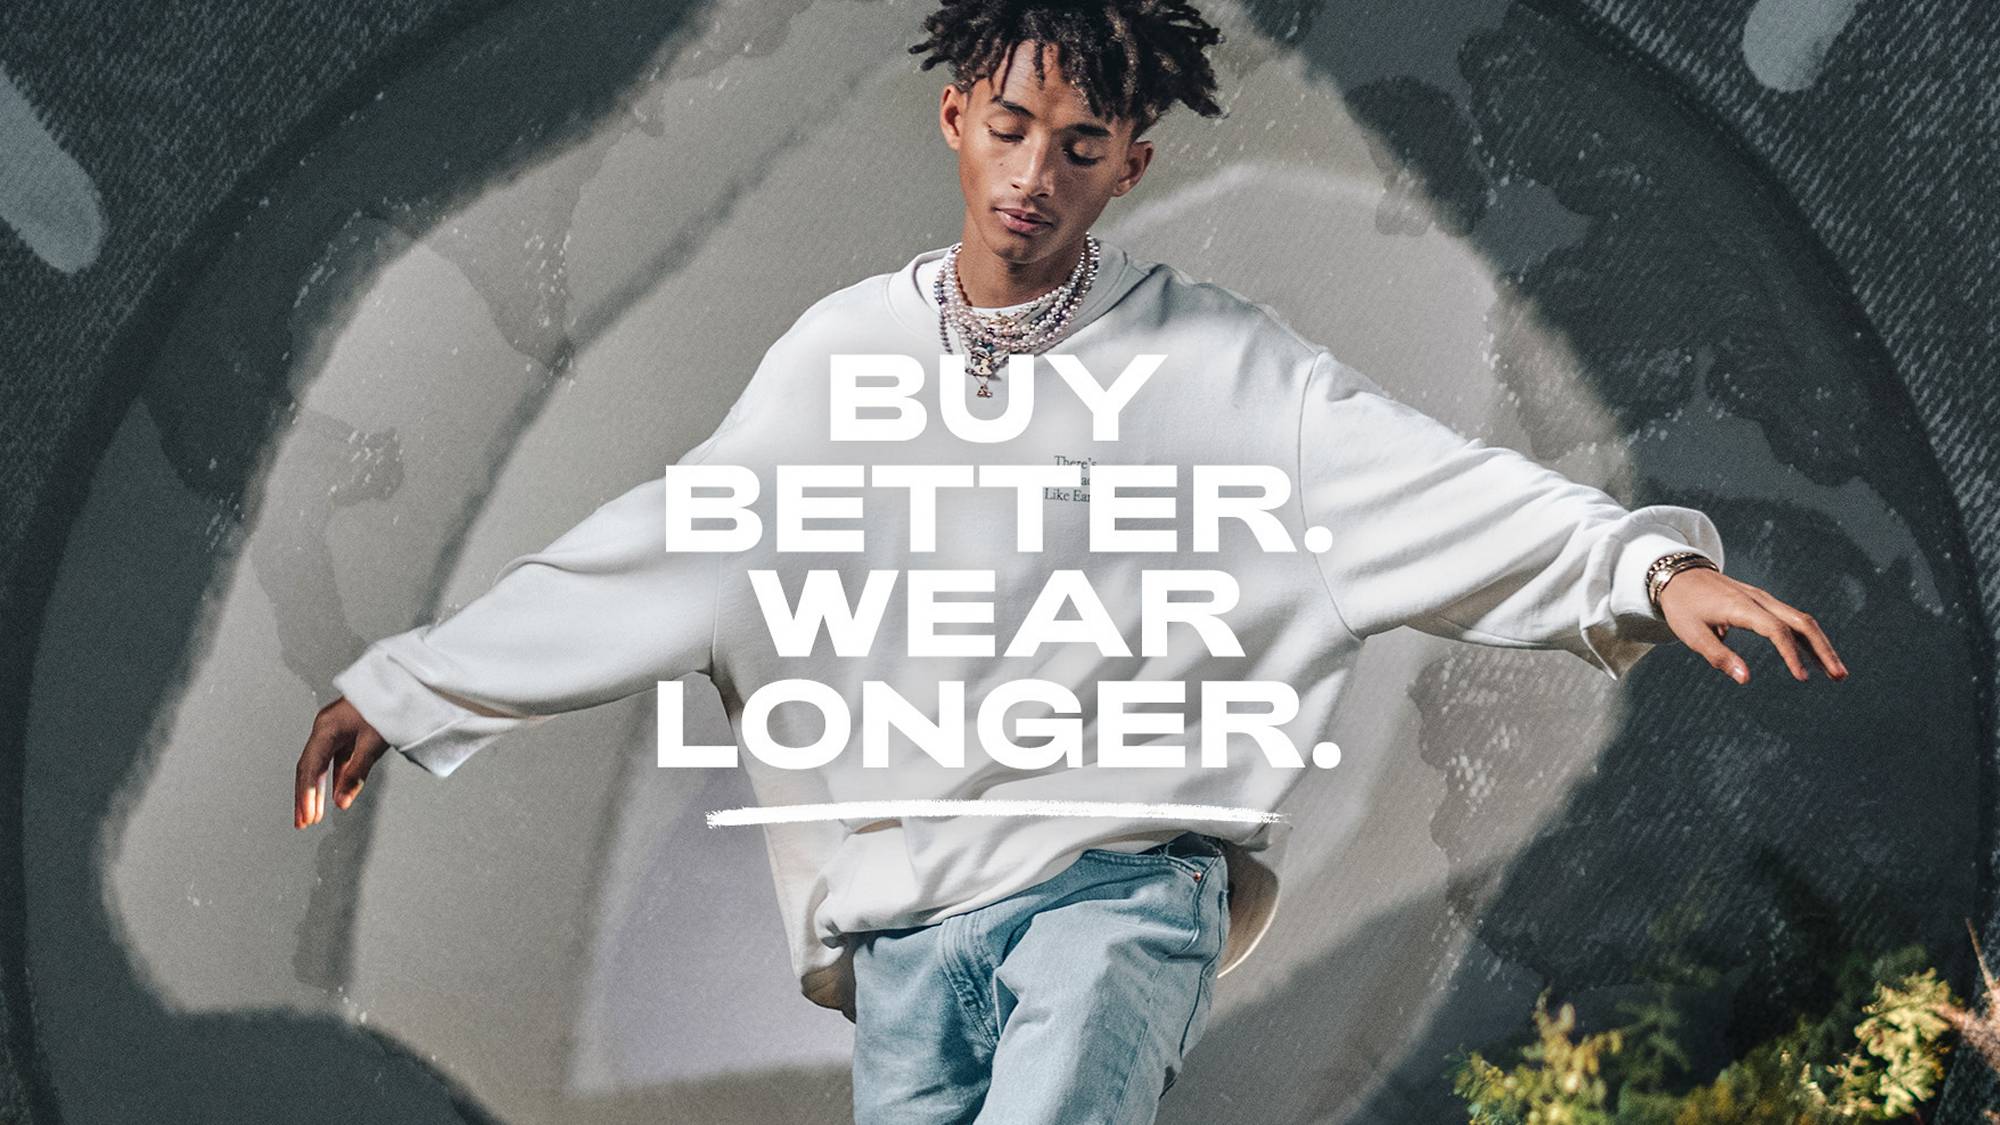 A photo of Jayden Smith wearing a grey sweatshirt with his arms spread out and the words, "Buy Better. Wear Longer." overlaid on the image.